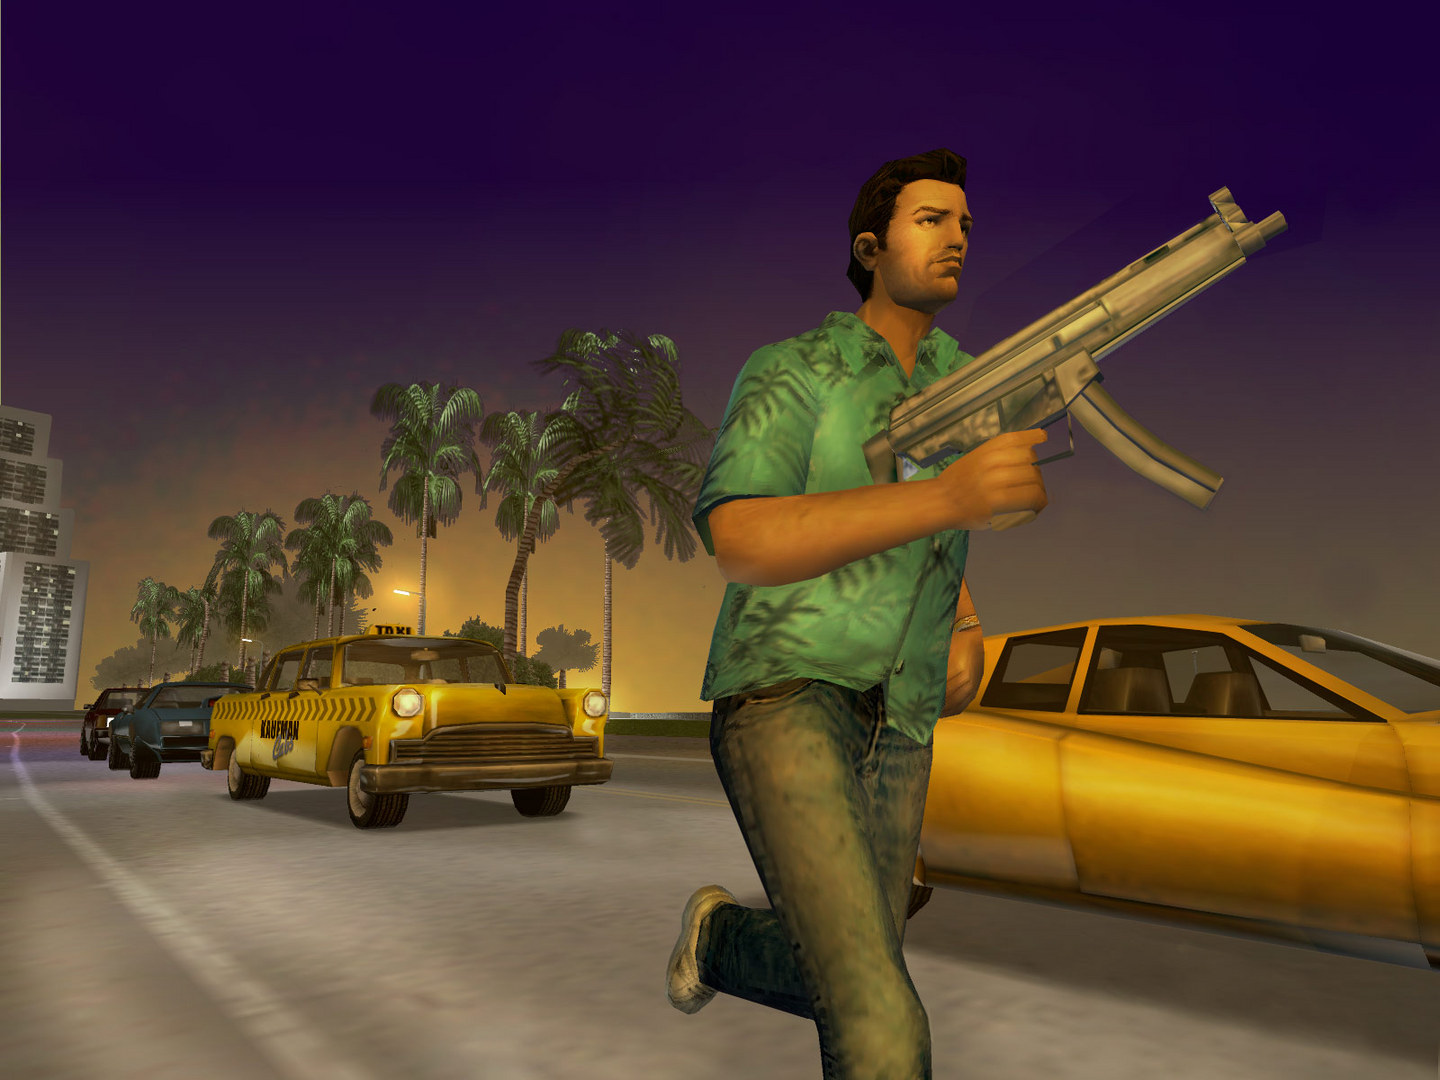 gta vice city pc download highly compressed